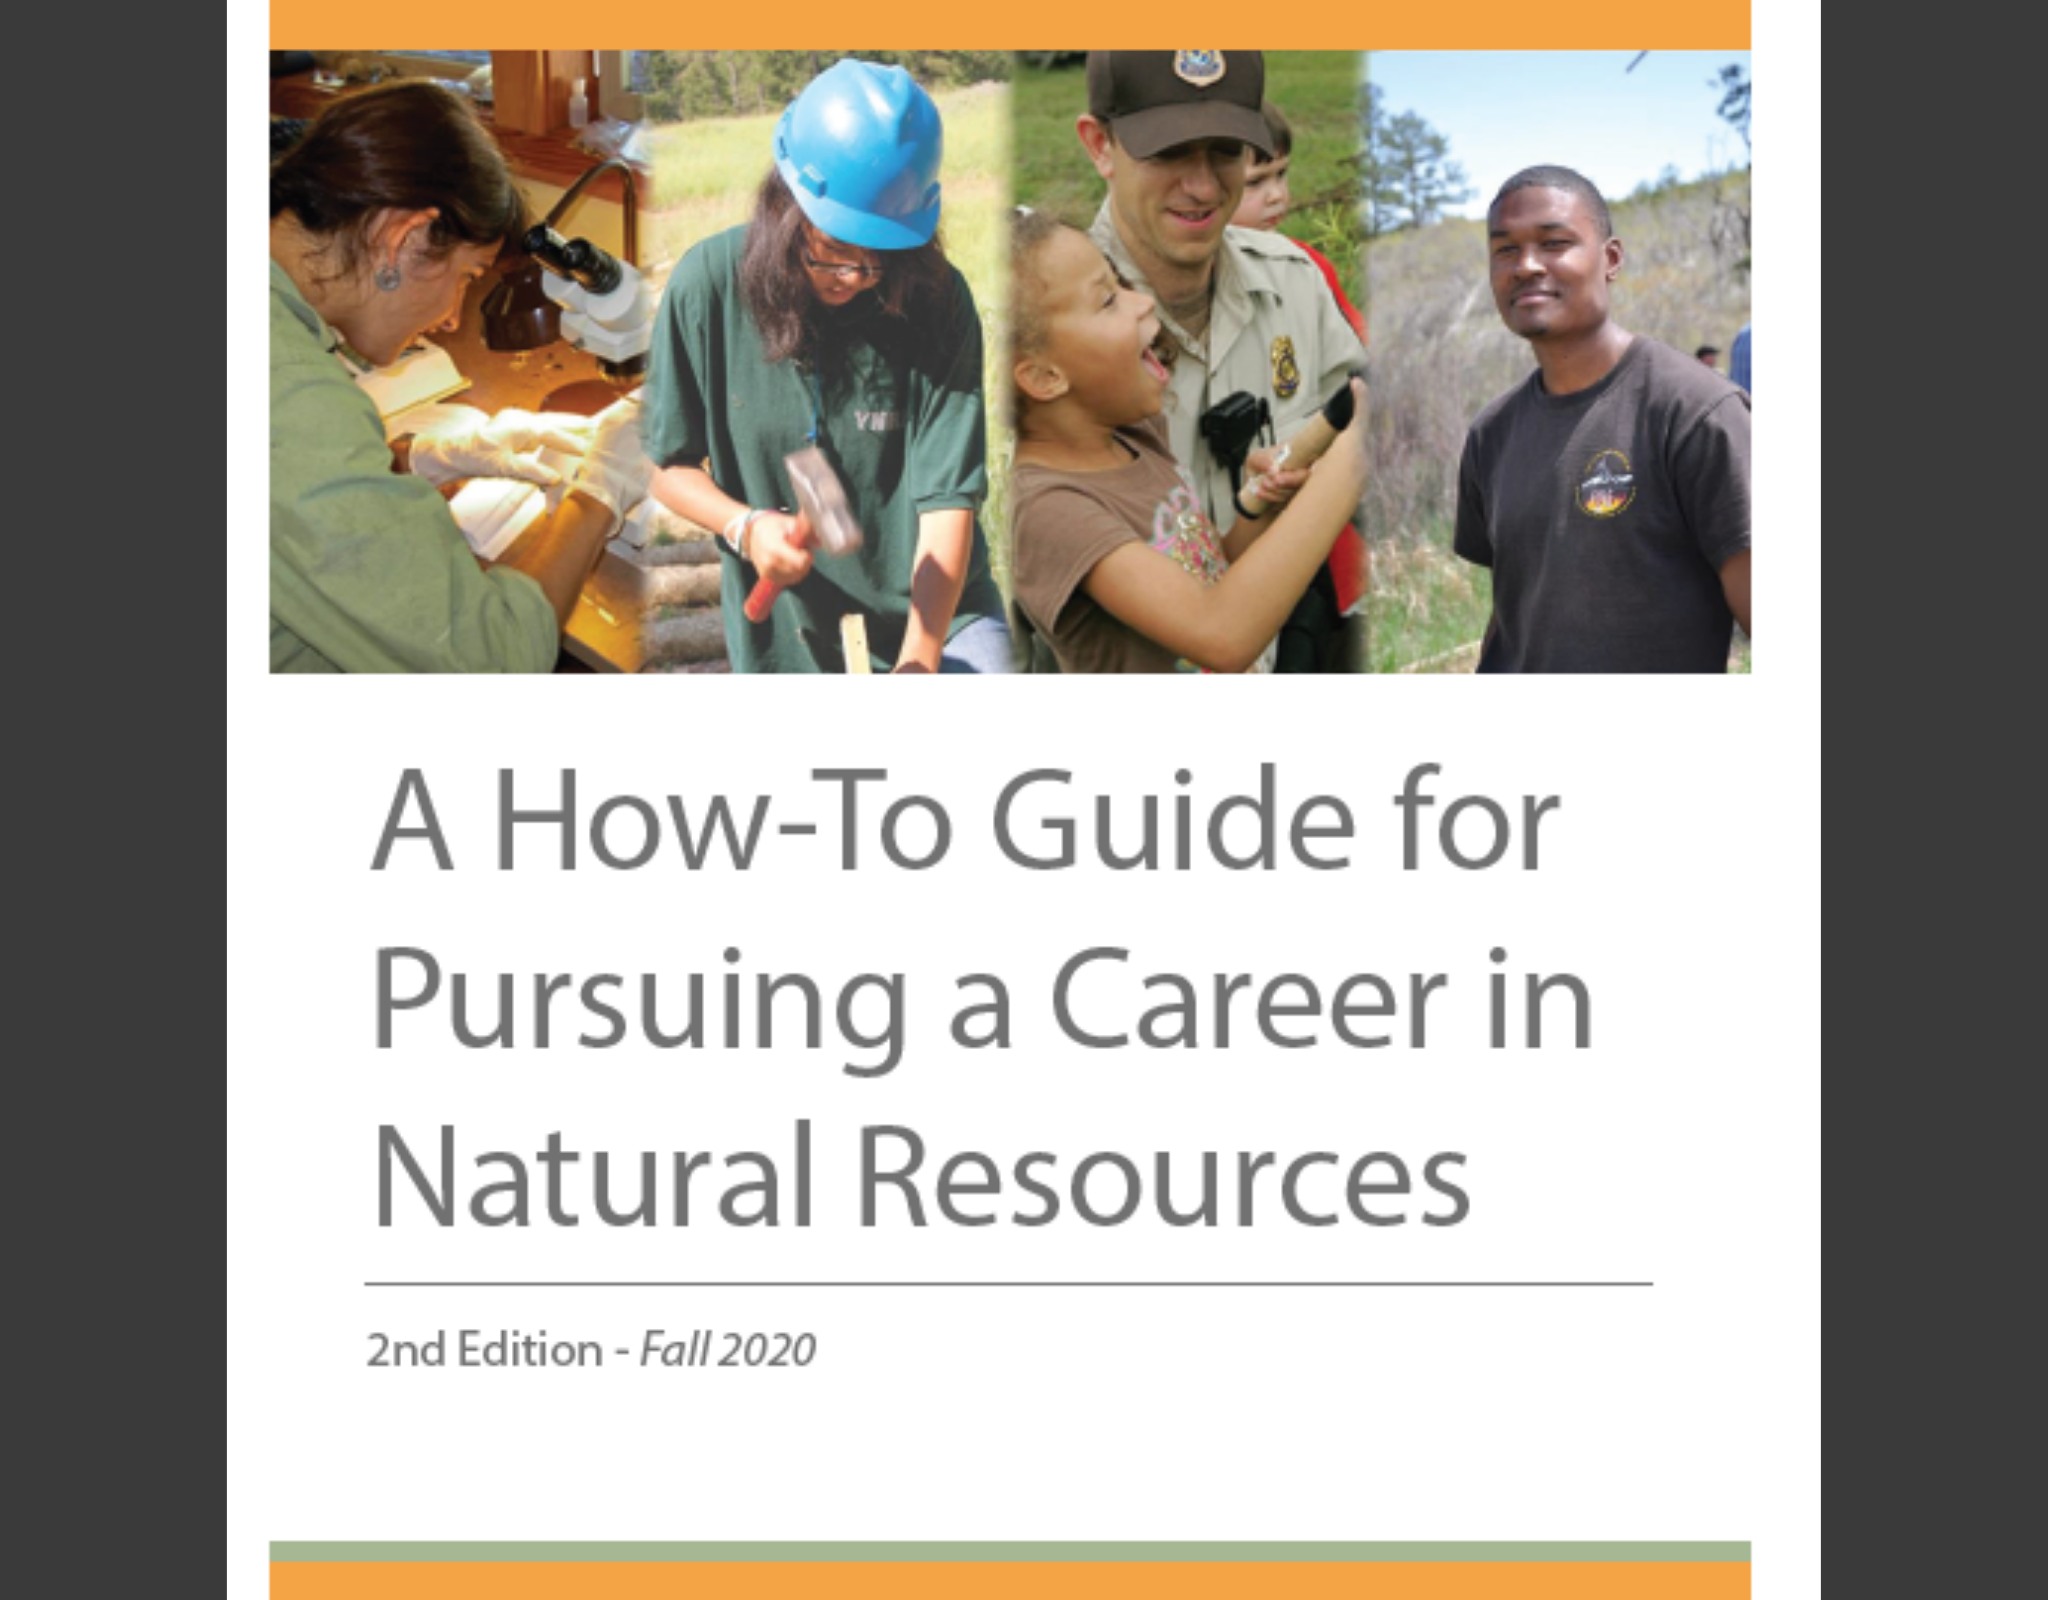 A How-To Guide for Pursuing a Career in Natural Resources